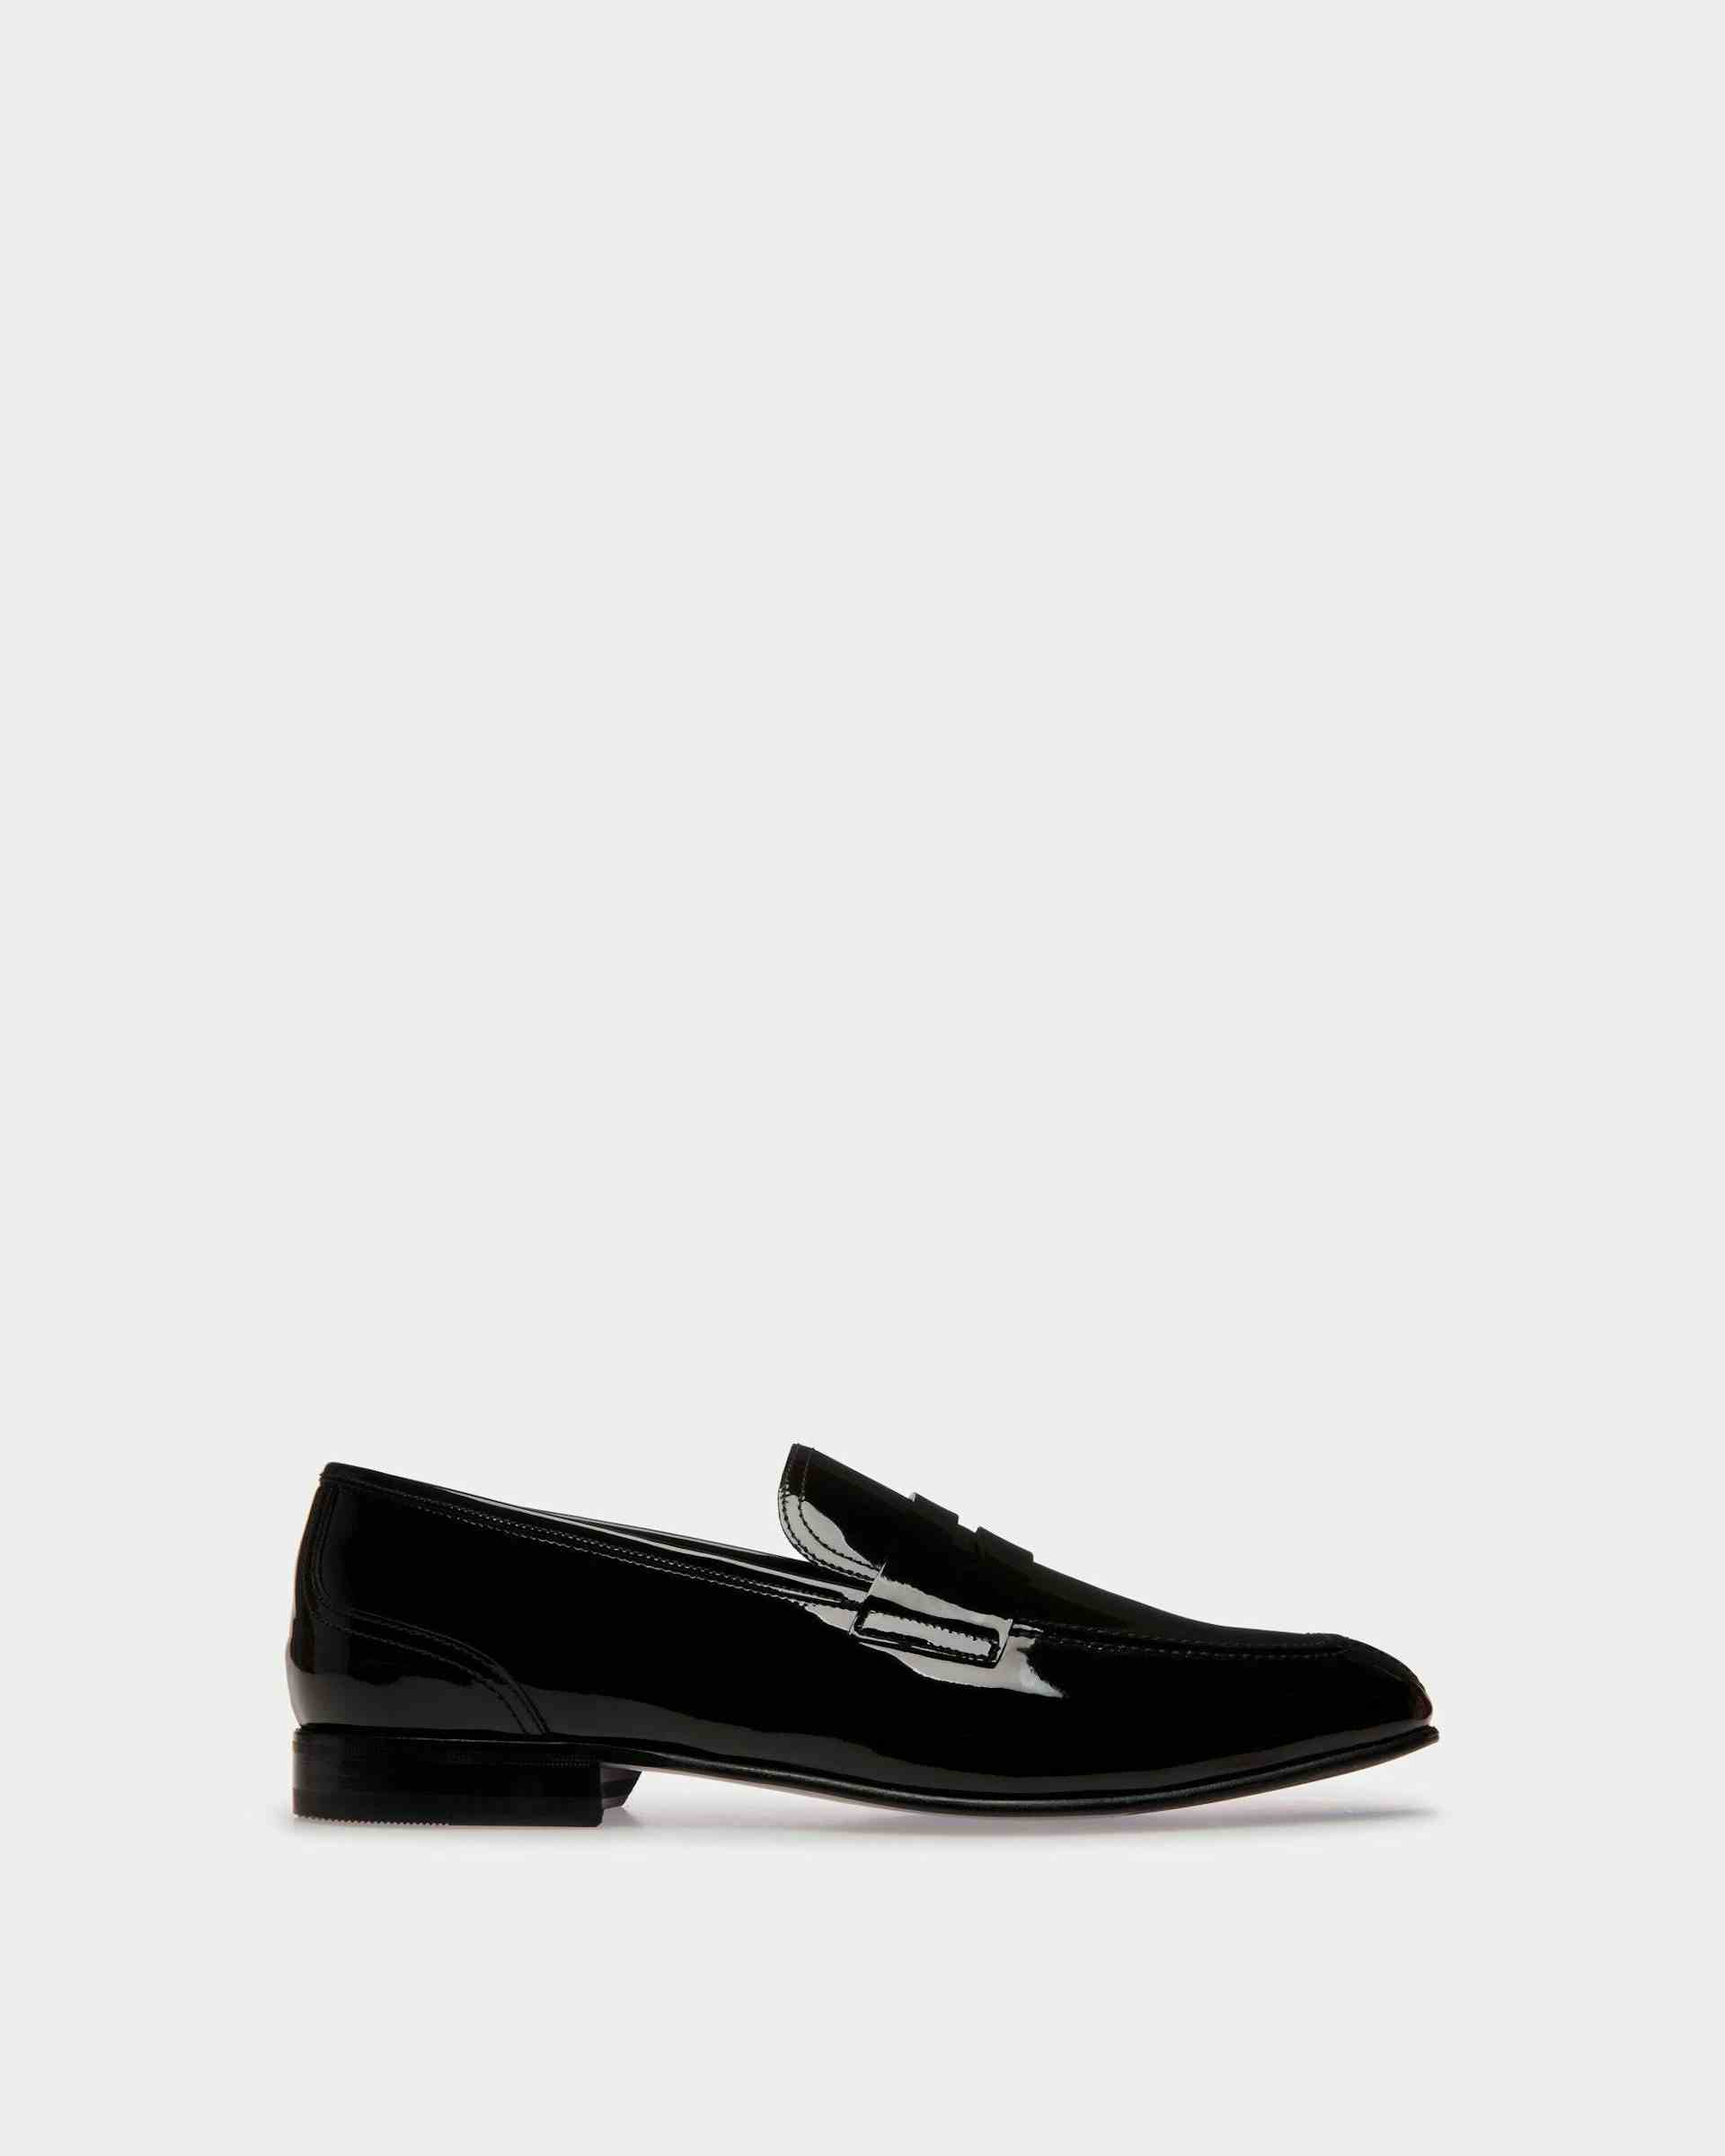 Suisse Loafer in Black Patent Leather - Men's - Bally